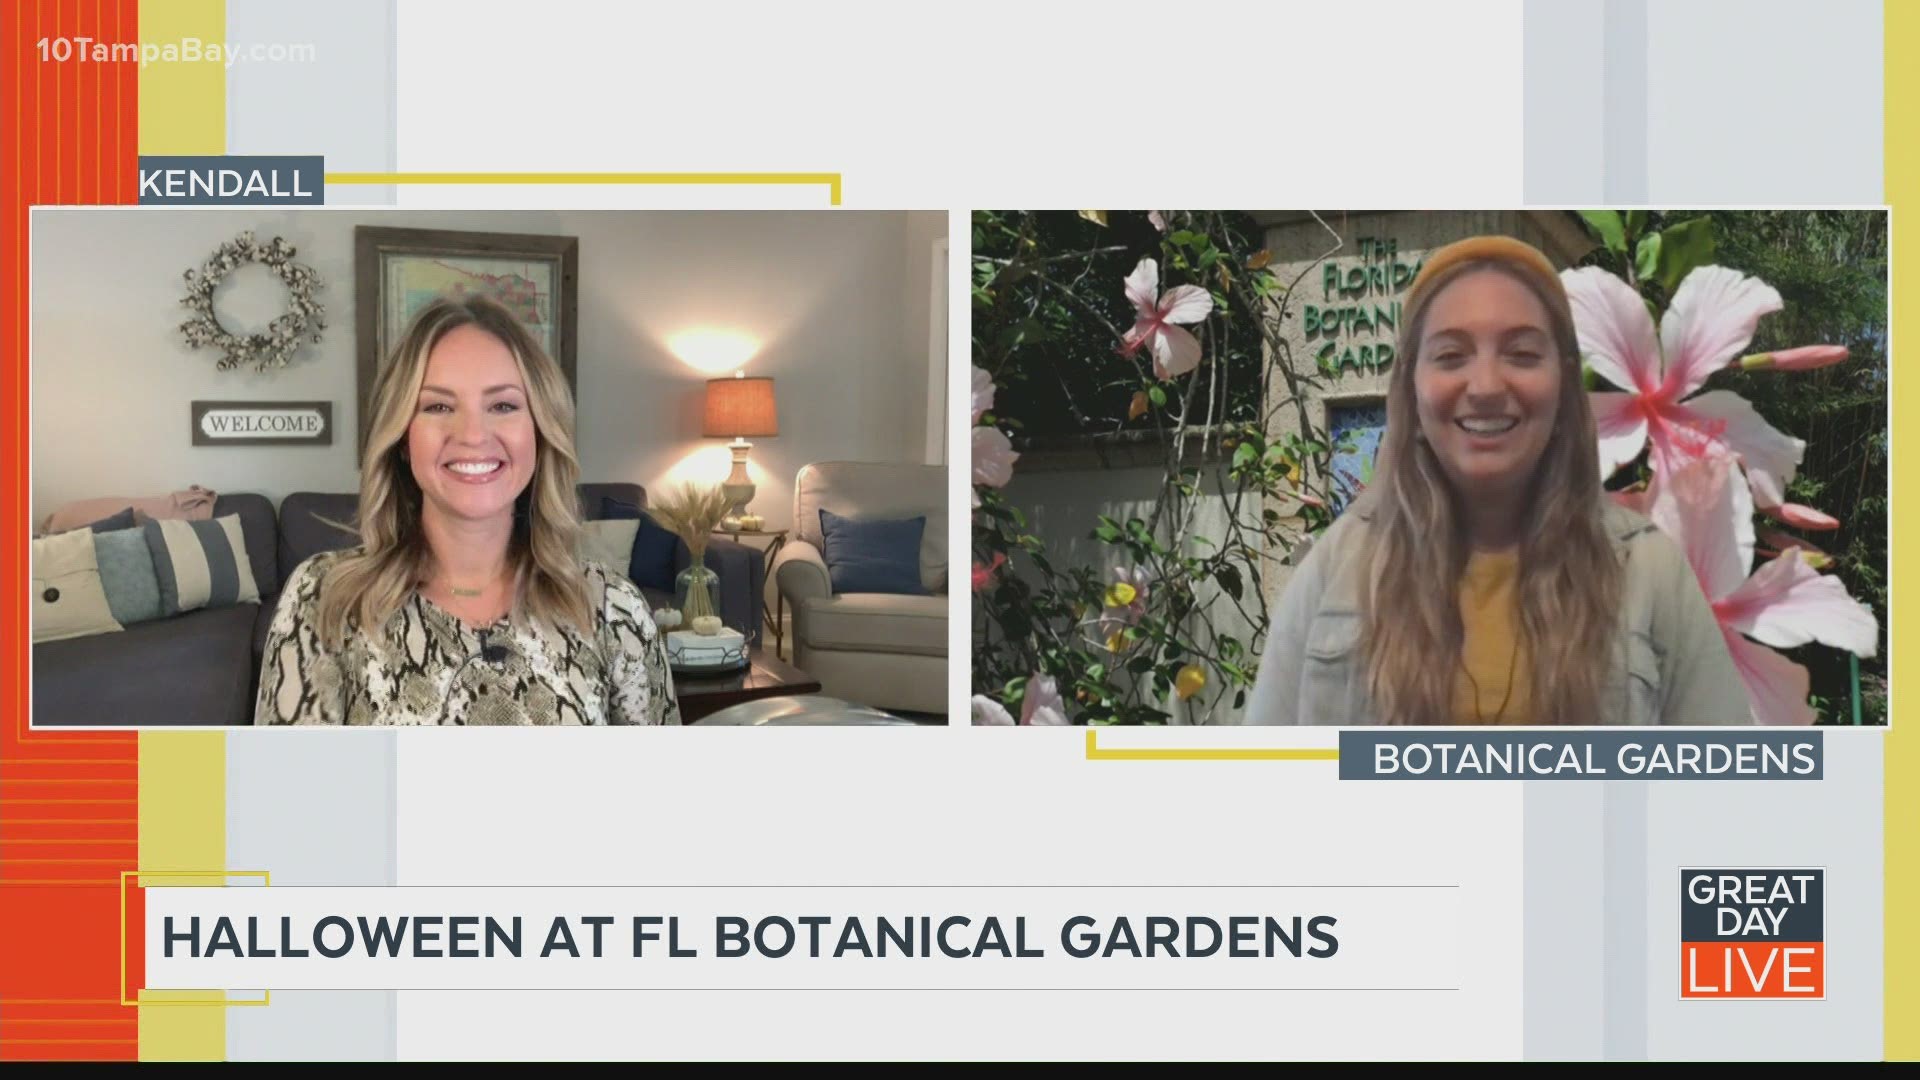 If you’re looking for more ways to have socially distant fun right now, don’t forget about the Florida Botanical Gardens.